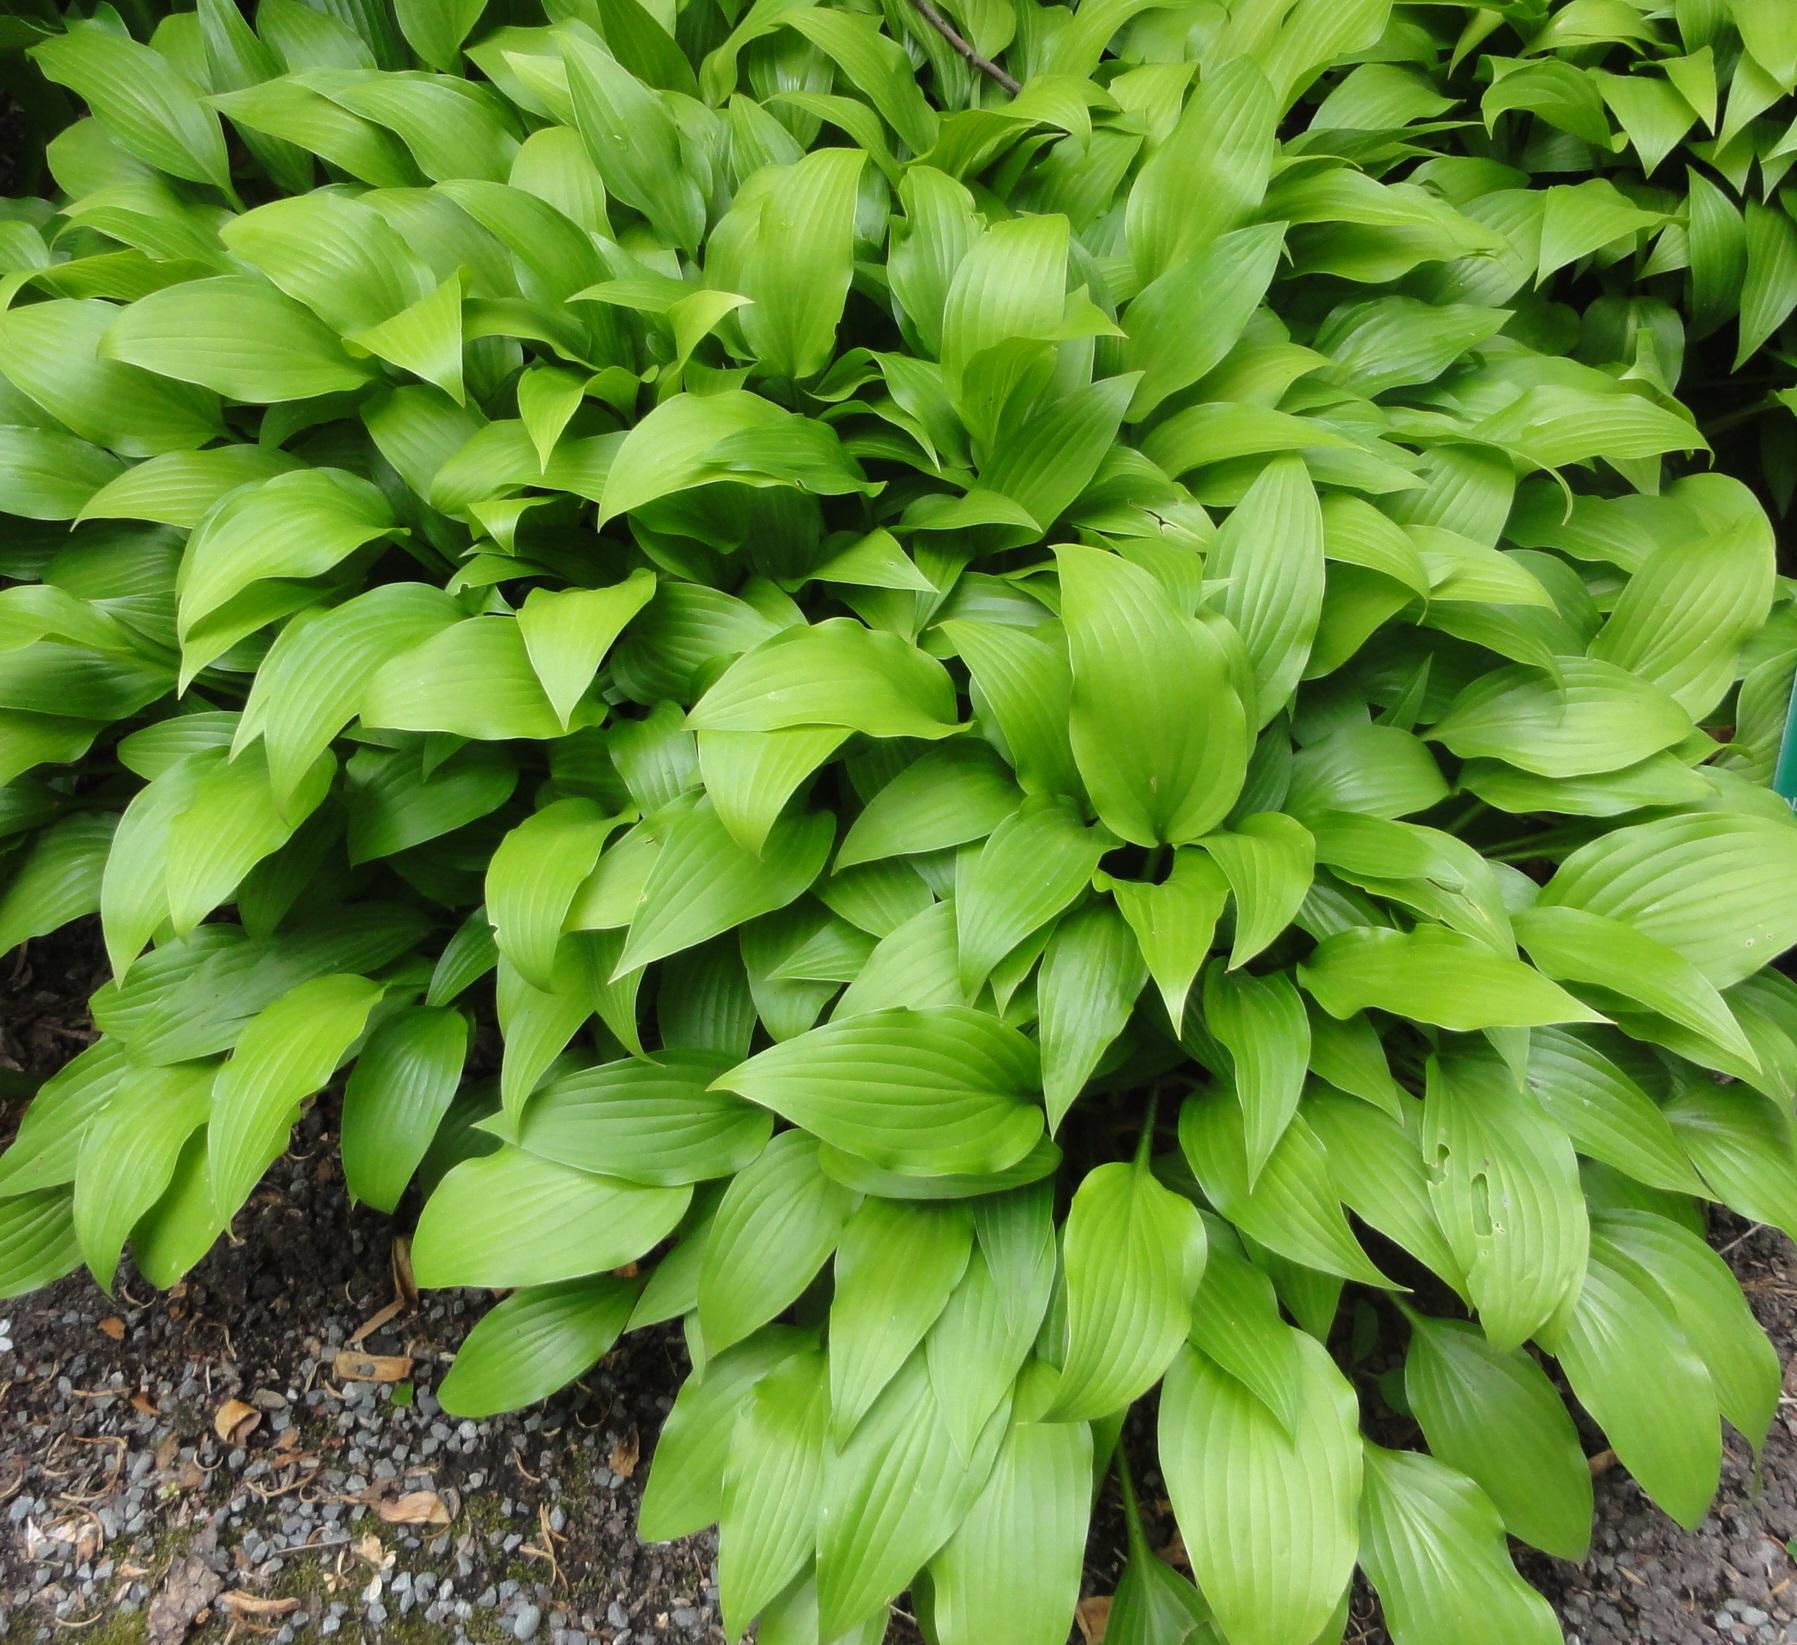 Green leaves with brown stems.